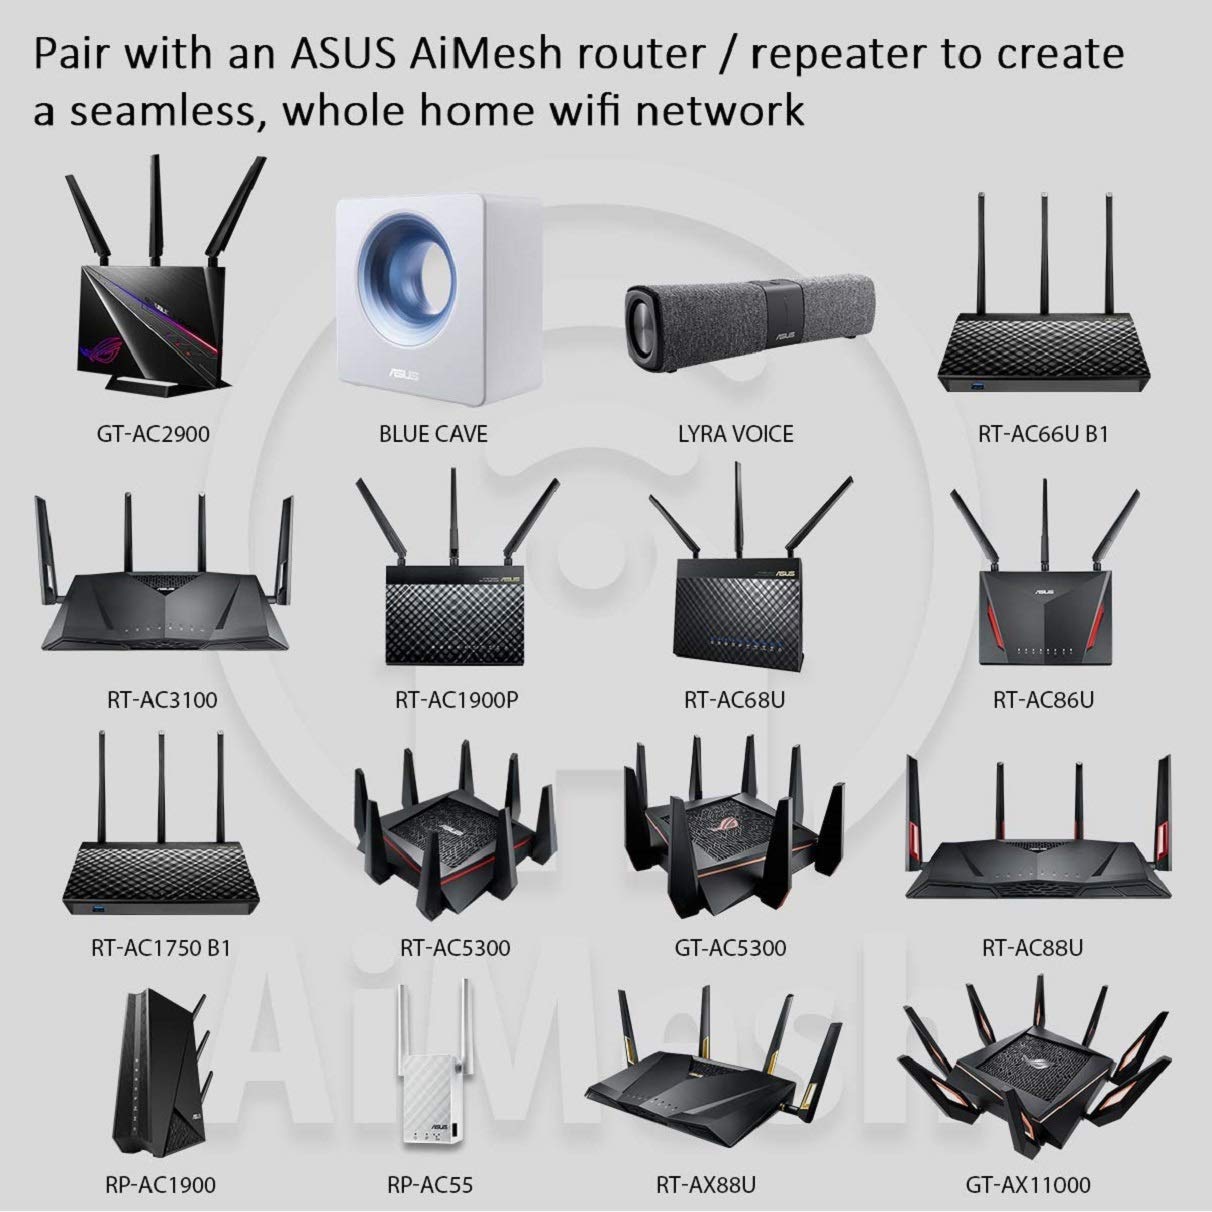 ASUS AC1900 WiFi Gaming Router (RT-AC68U) - Dual Band Gigabit Wireless Internet Router, Gaming & Streaming, AiMesh Compatible, Included Lifetime Internet Security, Adaptive QoS, Parental Control